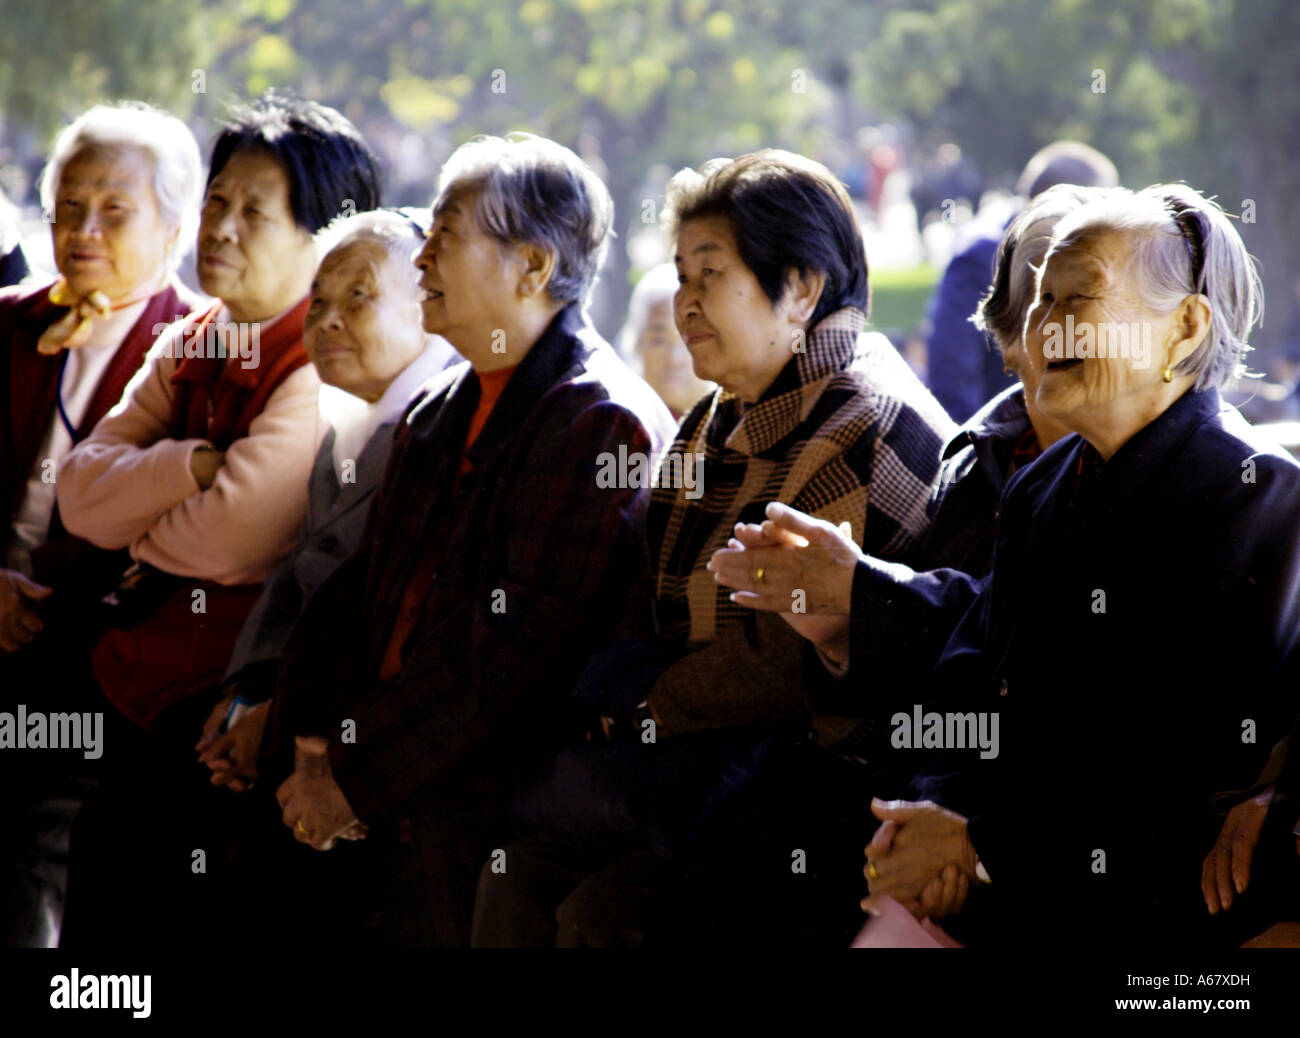 CHINA BEIJING Elderly Chinese citizens gather early in the morning at pavilion of the Temple of Heaven Park to sing traditional Stock Photo